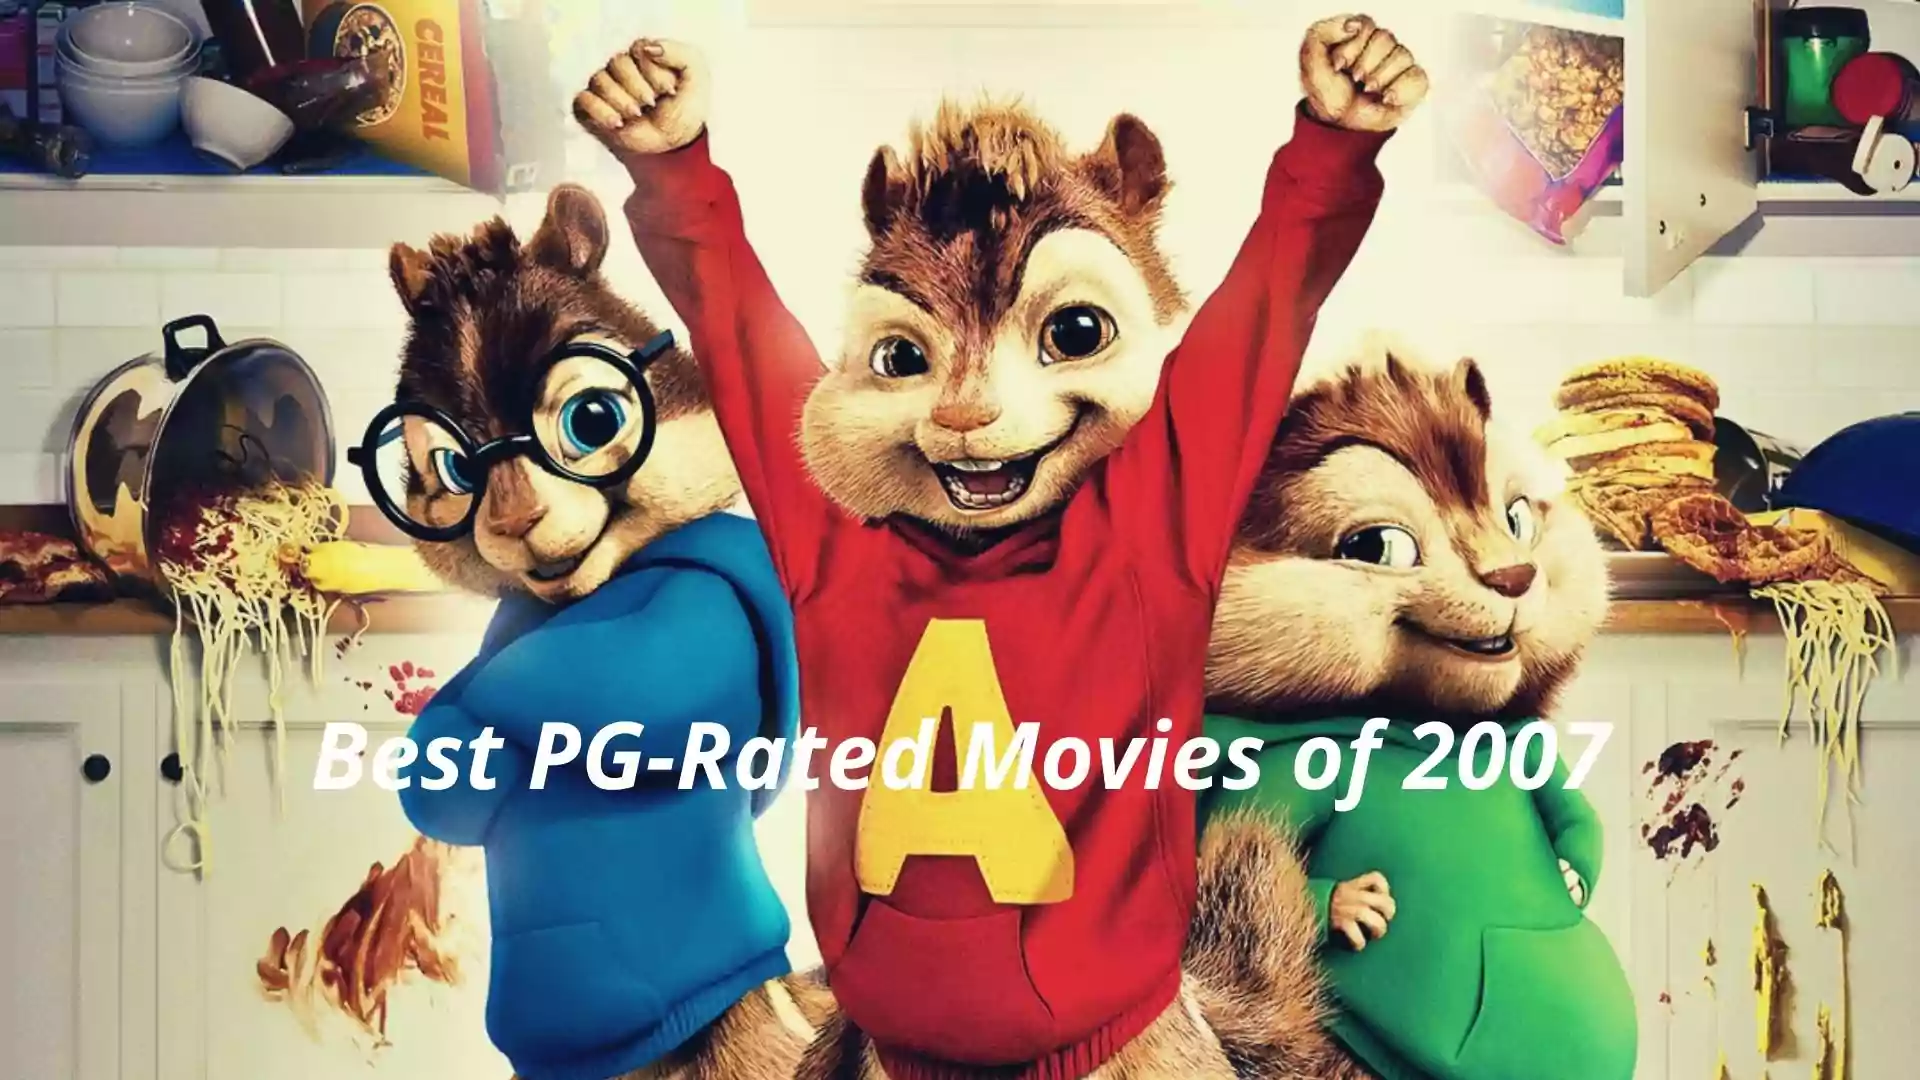 Best PG-Rated Movies of 2007